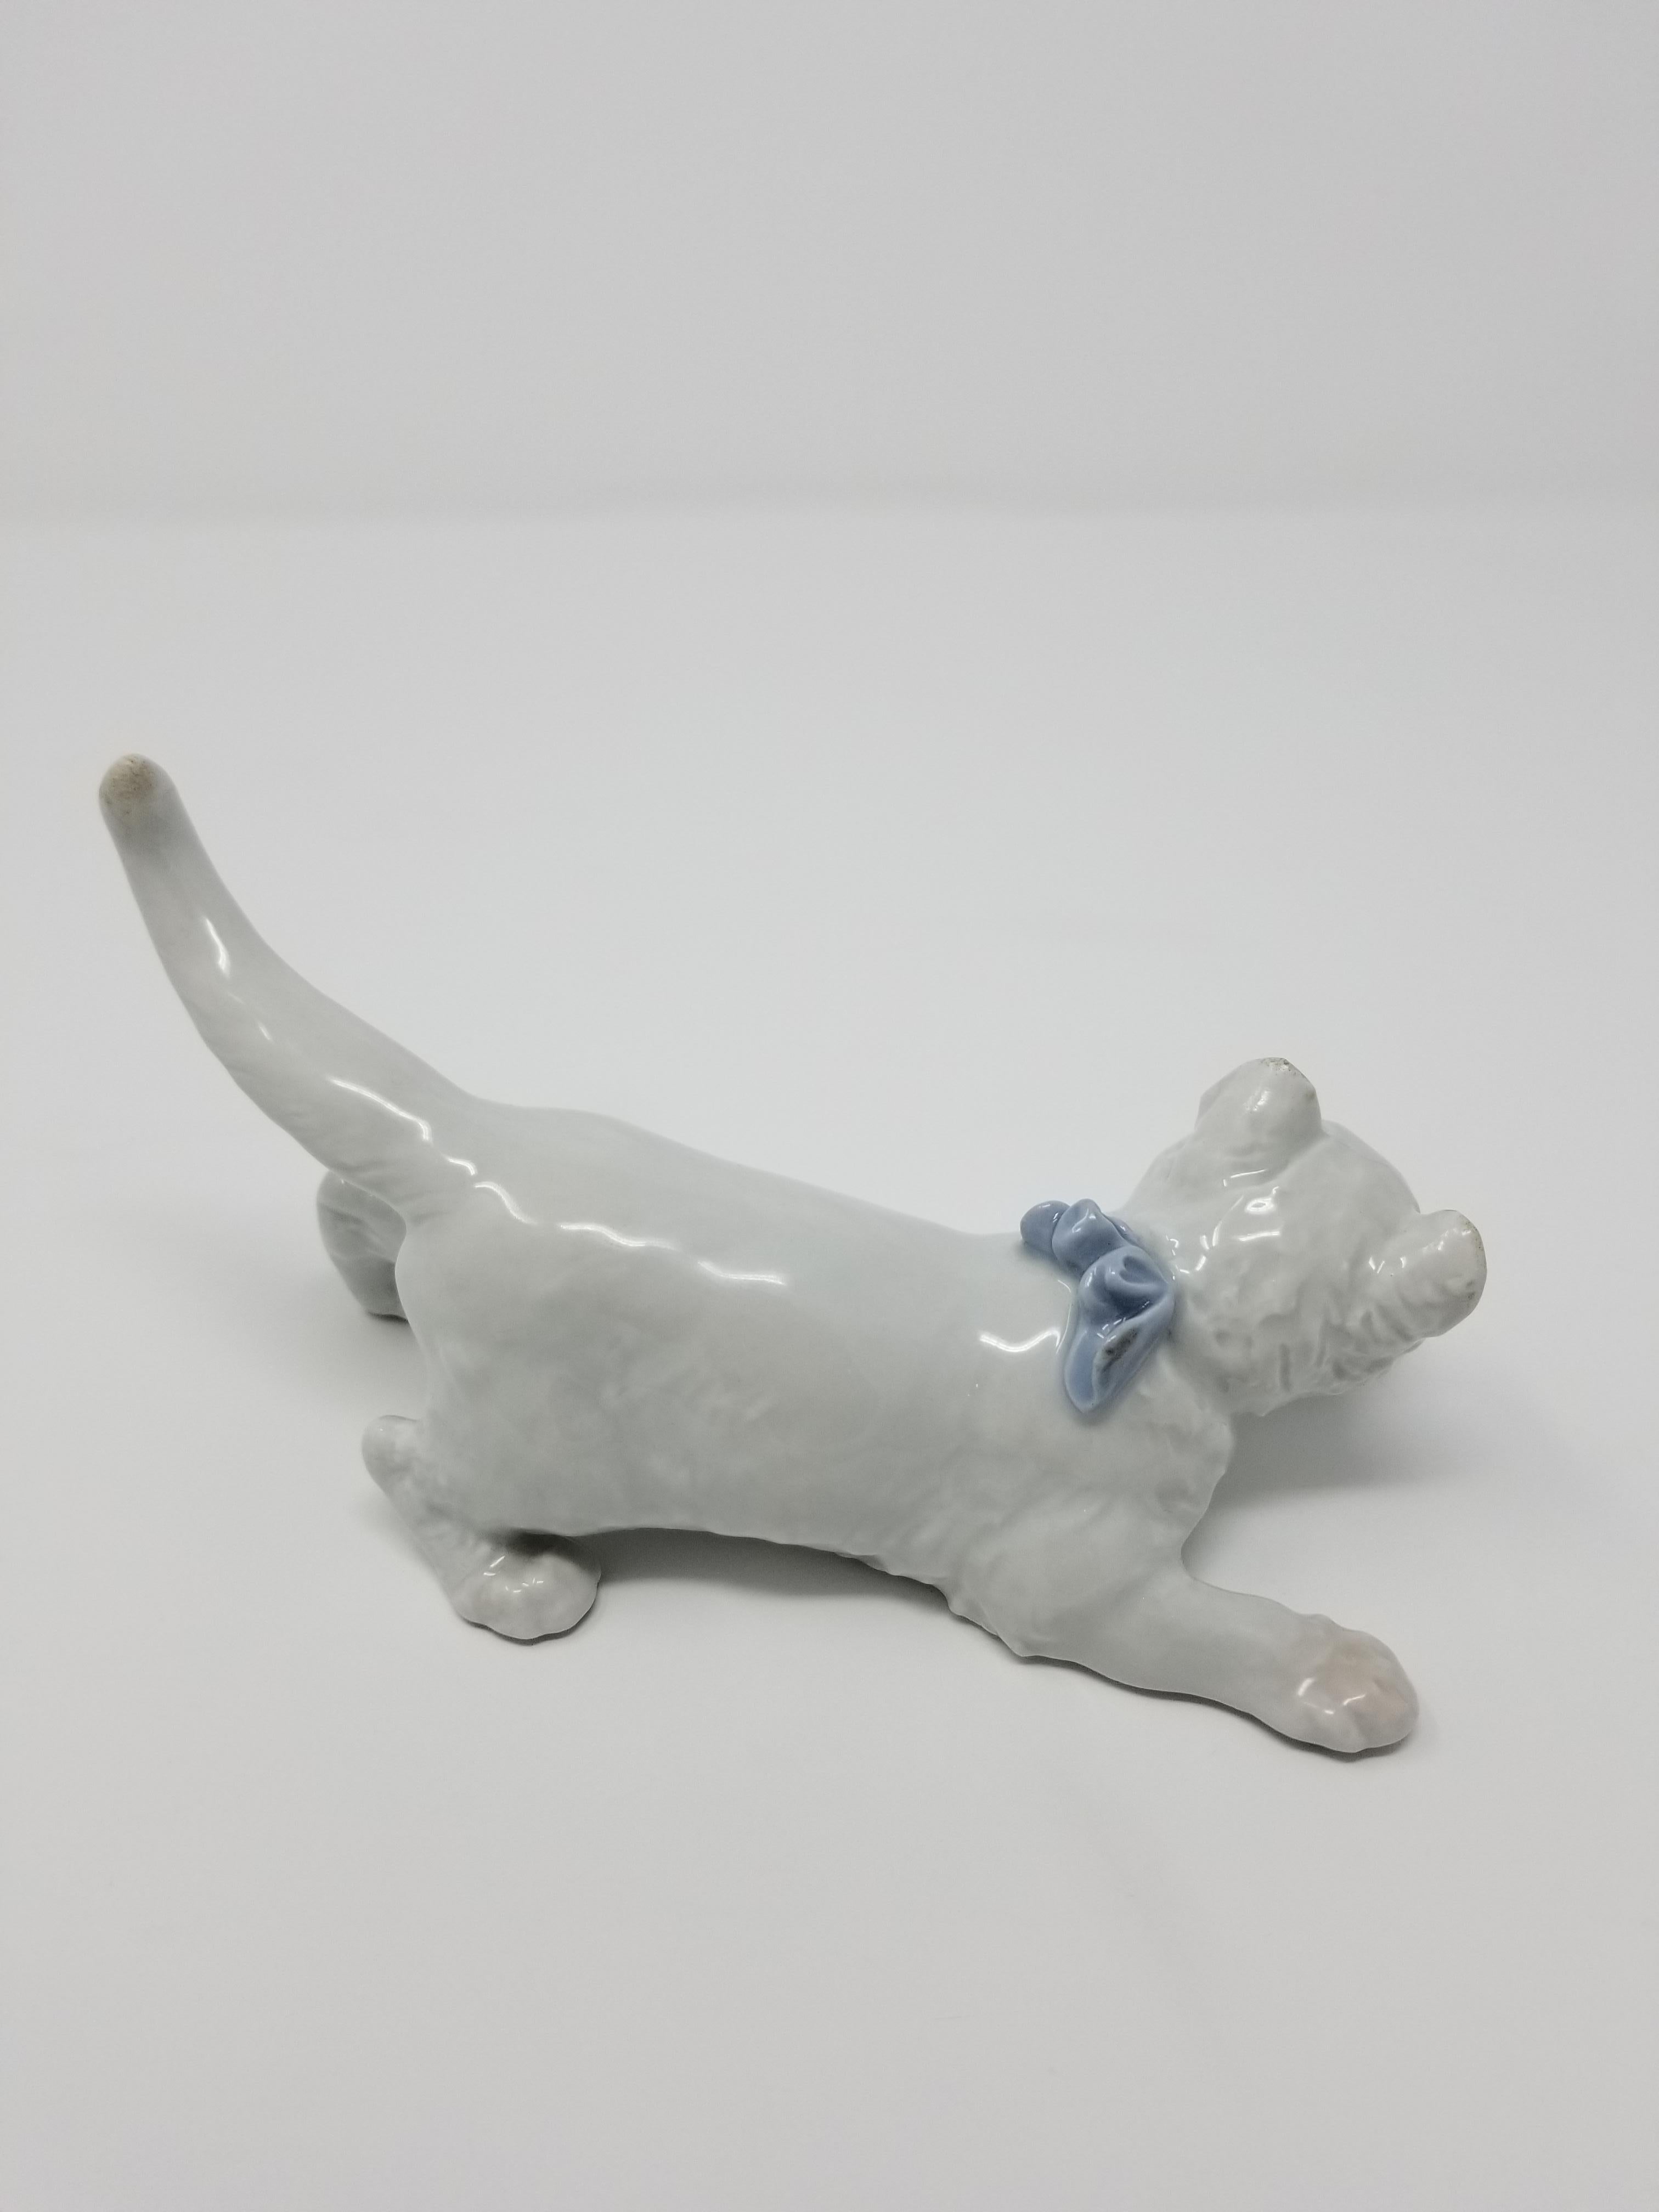 A model of a crouching kitten by Meissen, German, Modeled by Otto Jarl, 1903. The kitten is shown to have pinkish eyes with a pinkish nose and a blue bow. These delicate touches of color serve to highlight the brilliant white porcelain for which